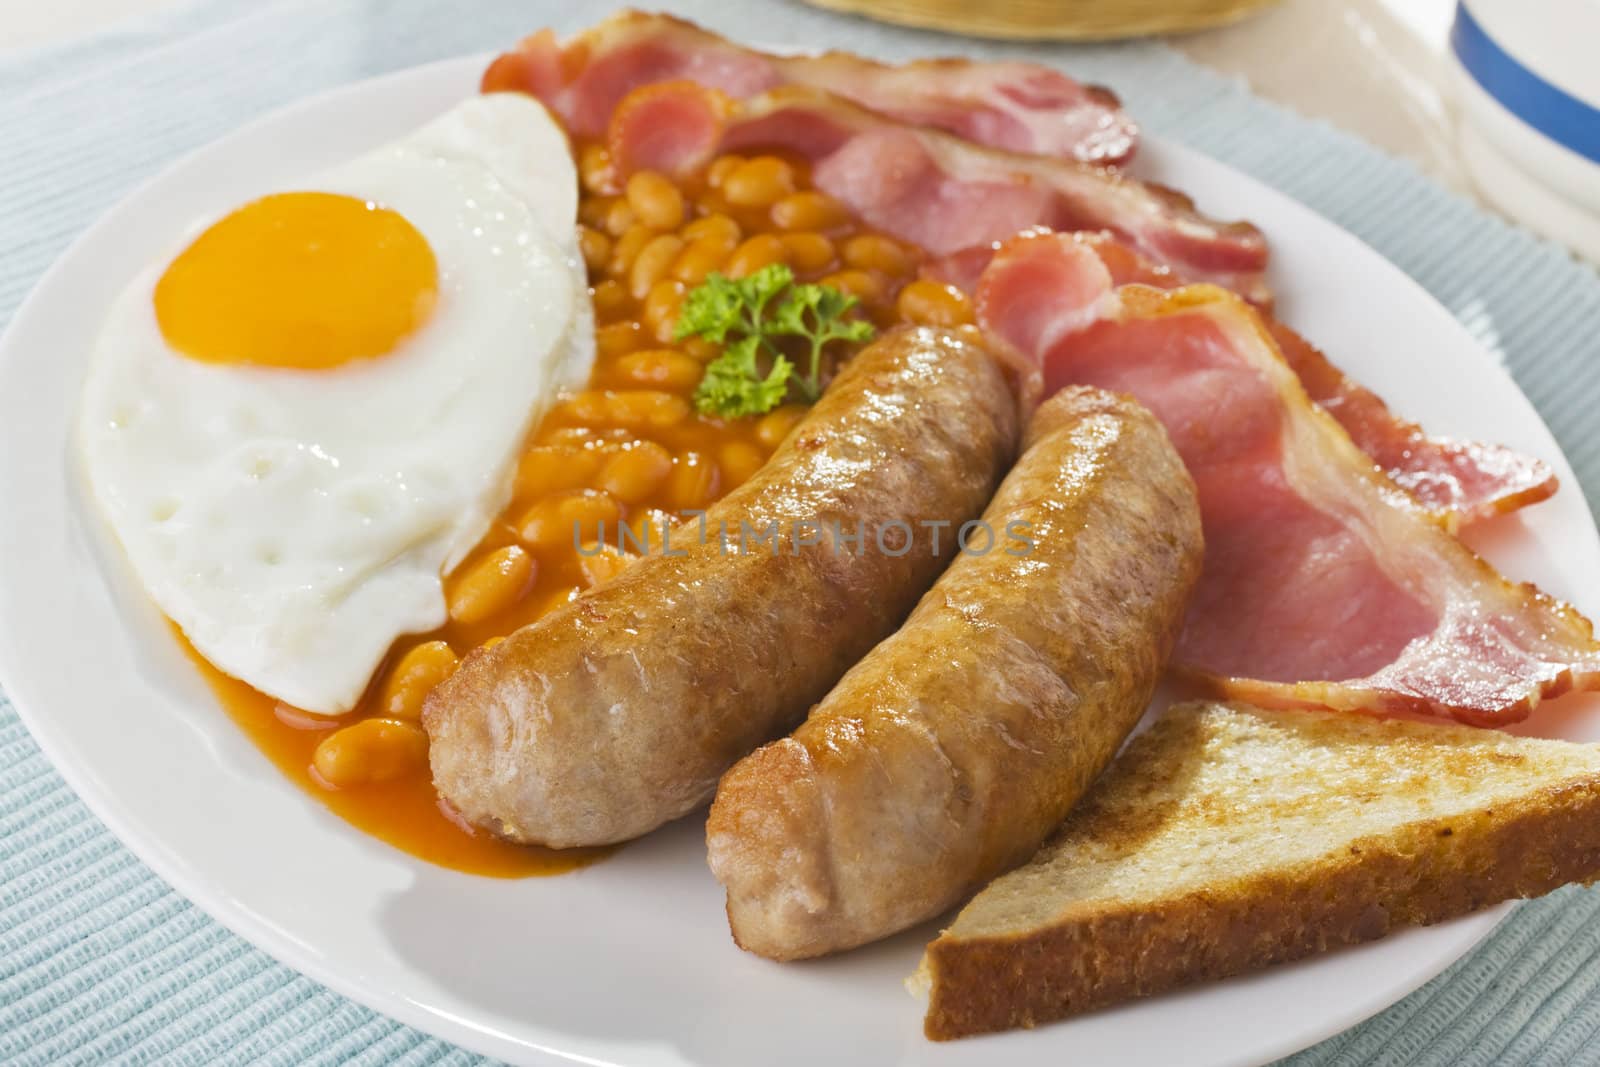 Bacon Egg Sausage and Beans Breakfast by Travelling-light